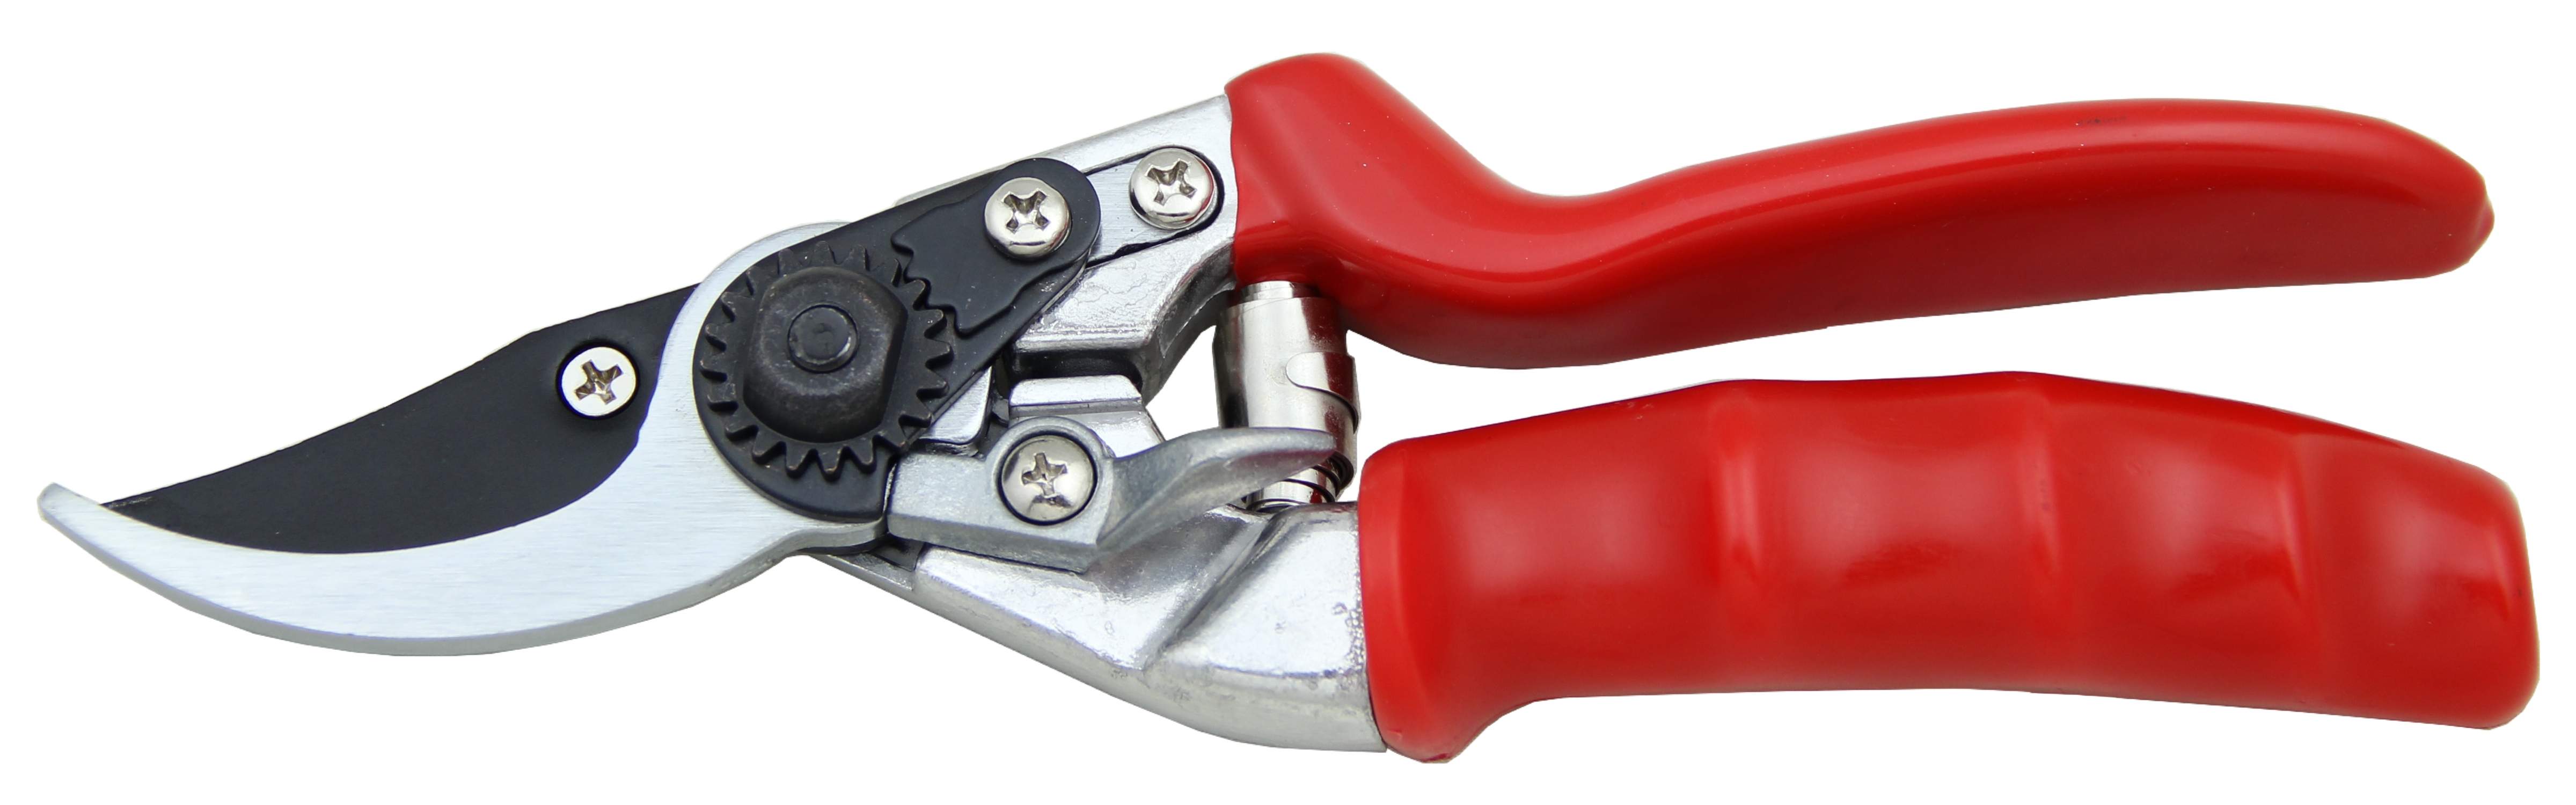 8.25” Bypass Pruner with Rotating Handle